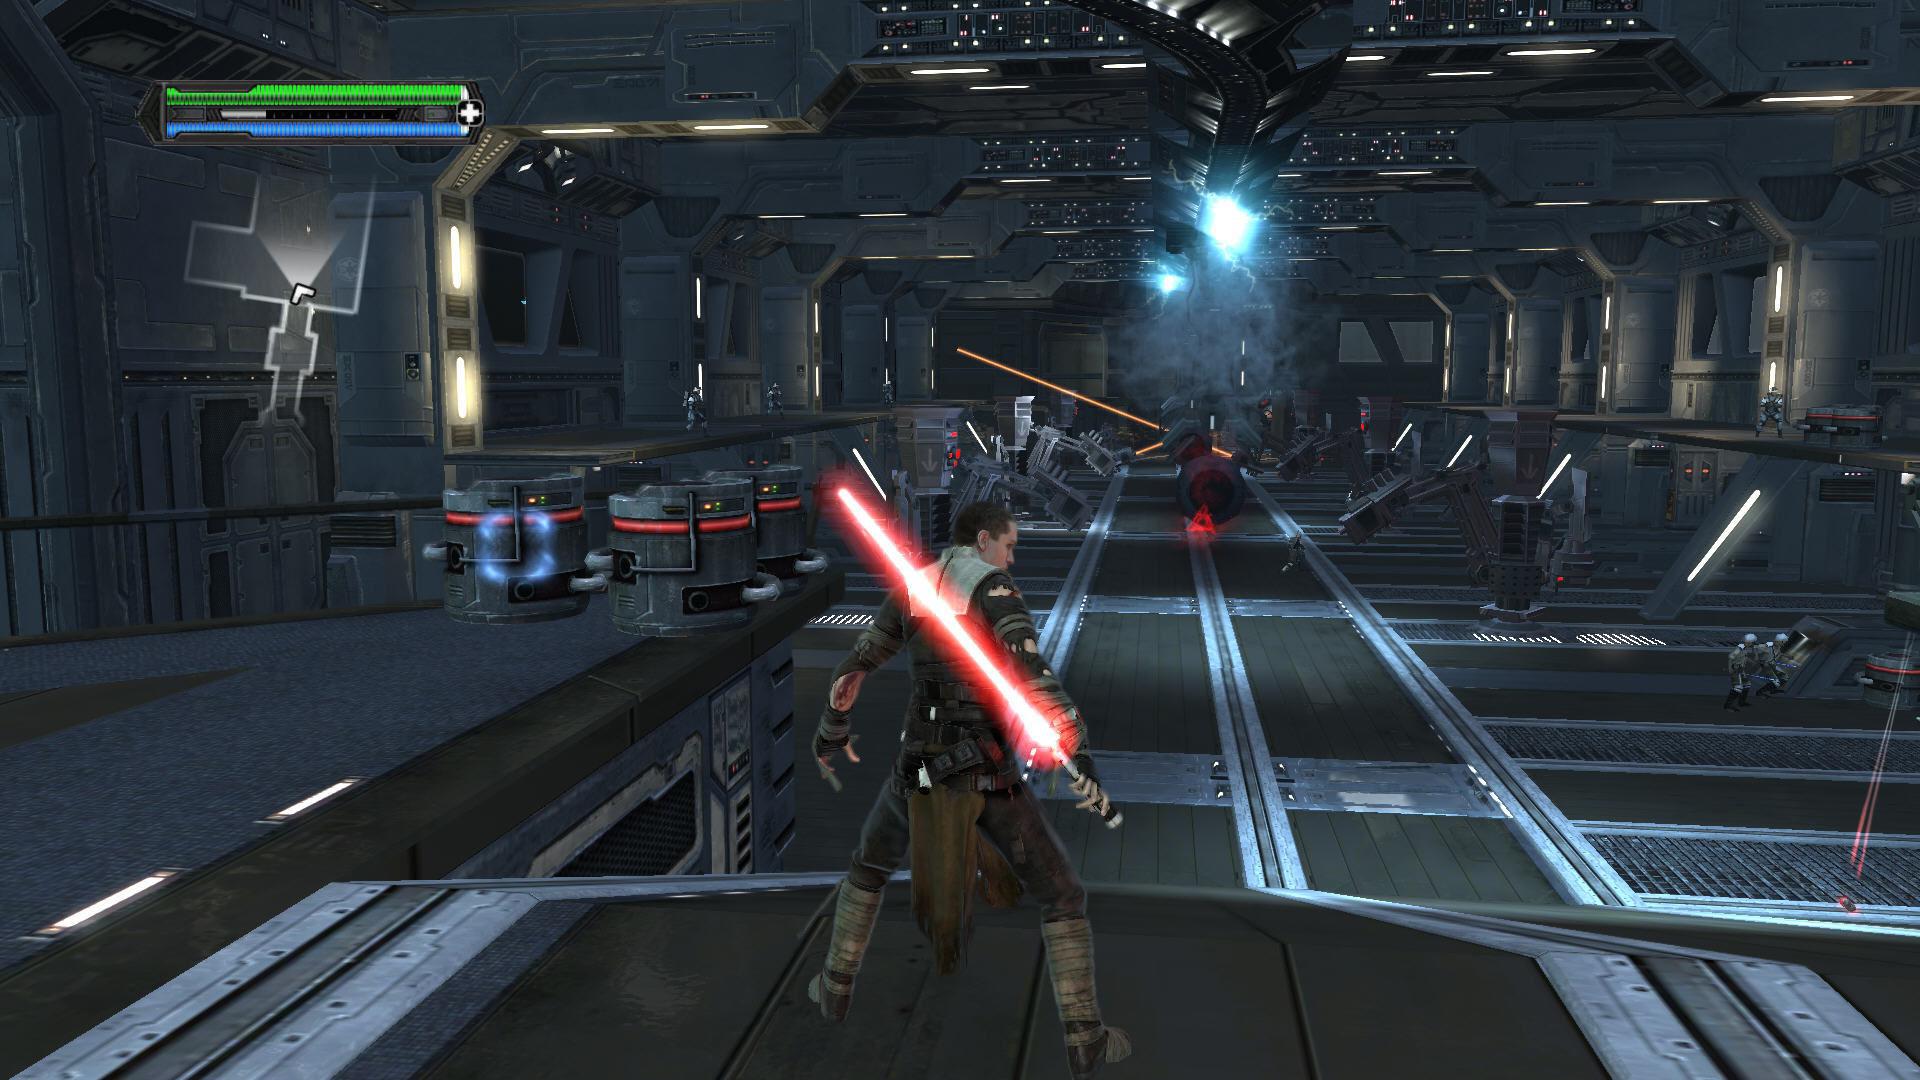 Игра star wars the force unleashed. Игра Star Wars unleashed 3. Стар ВАРС the Force unleashed 1. Star Wars: the Force unleashed - Ultimate Sith Edition. Star Wars the Force unleashed 2008.